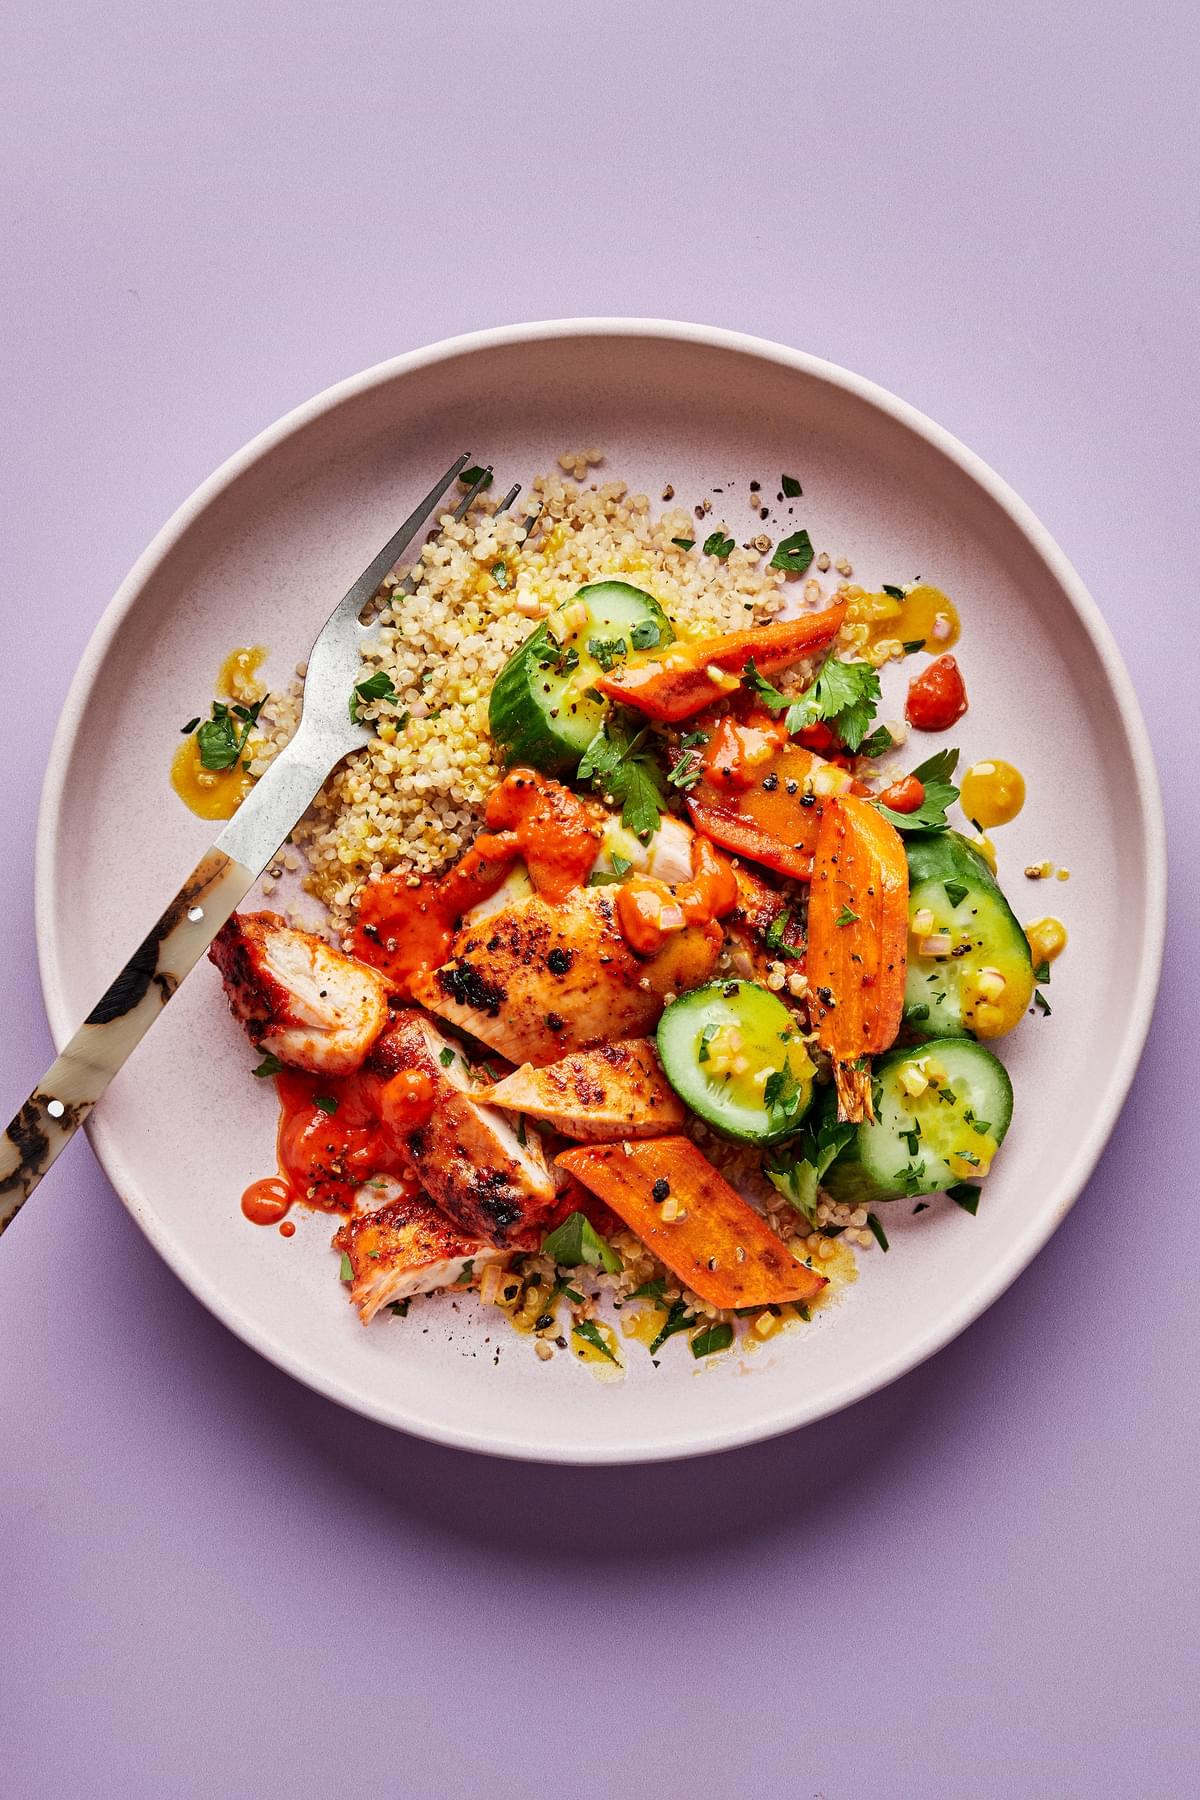 a bowl of quinoa topped with chicken with red pepper sauce, roasted carrots, cucumbers and drizzled with turmeric vinaigrette